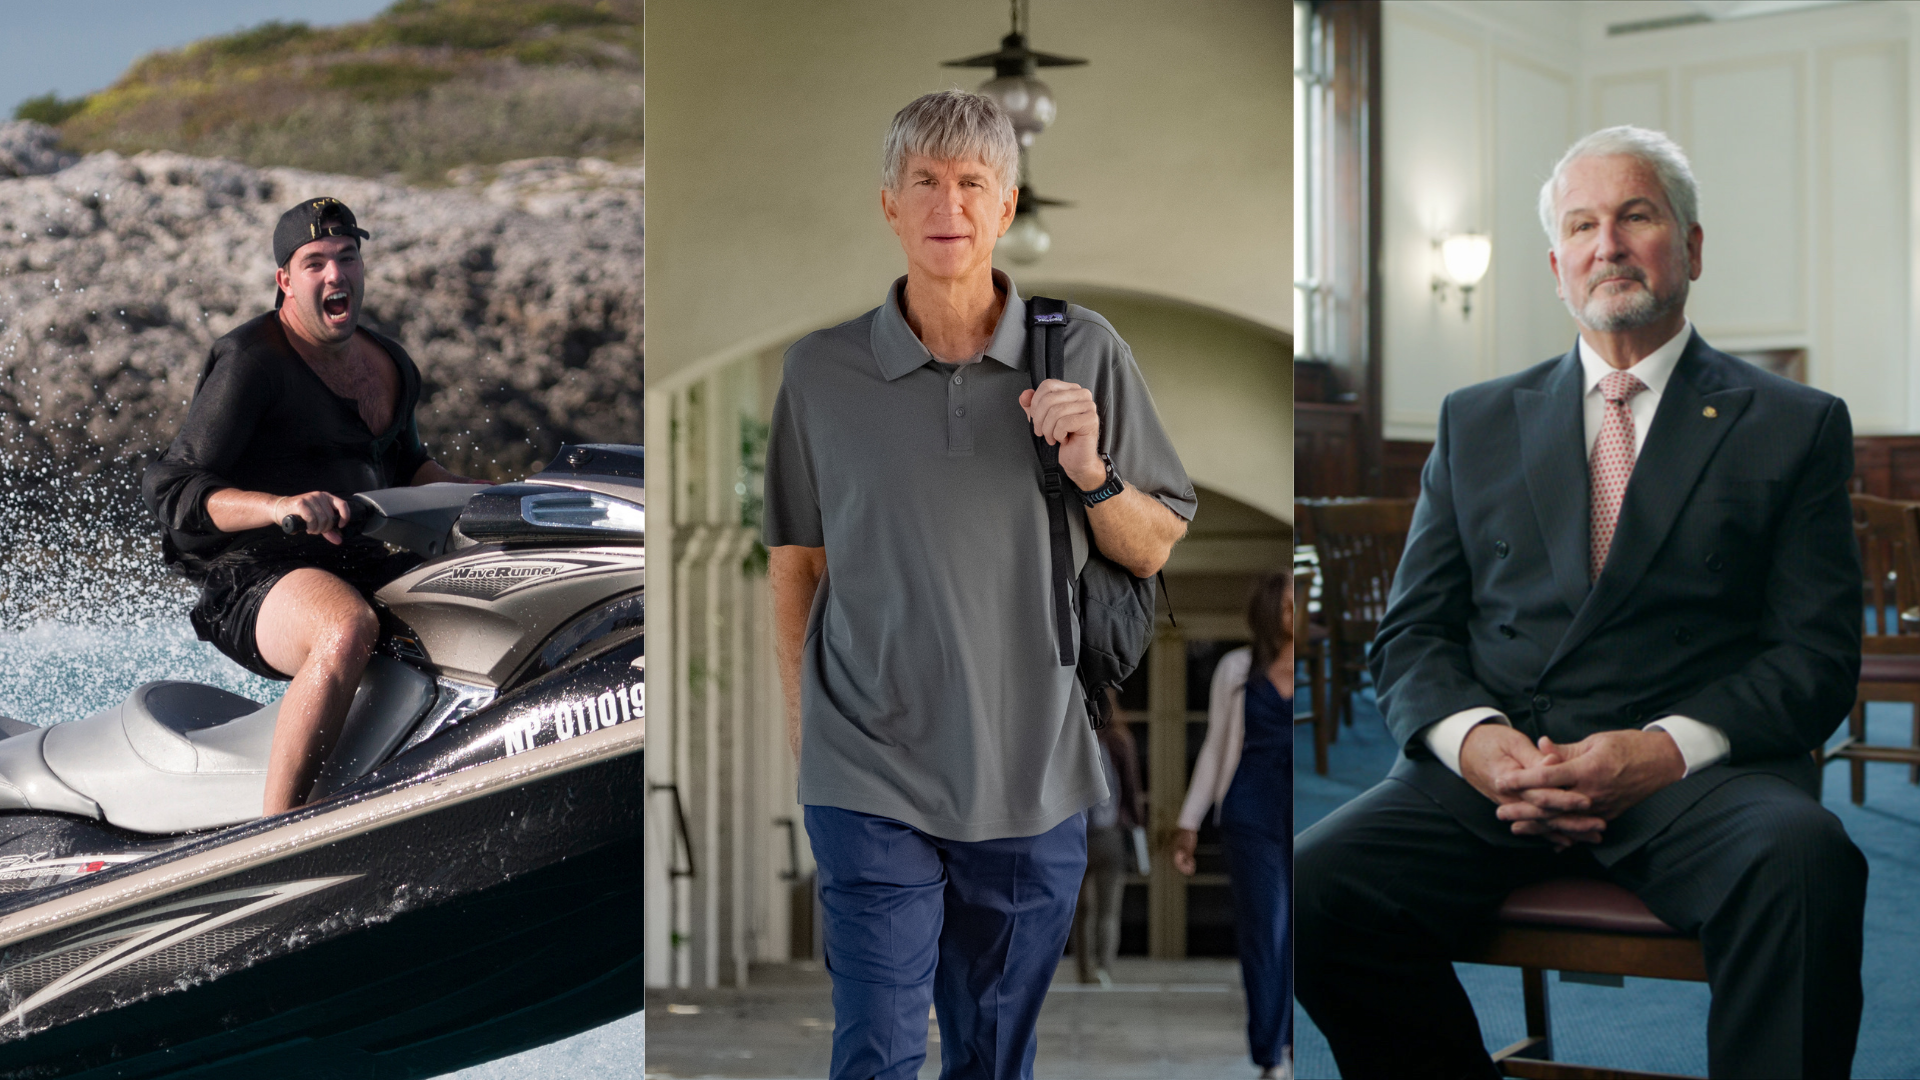 If you’ve worn out LuLaRich, try these 7 documentaries about grifters, scammers, and Fyre fraudsters